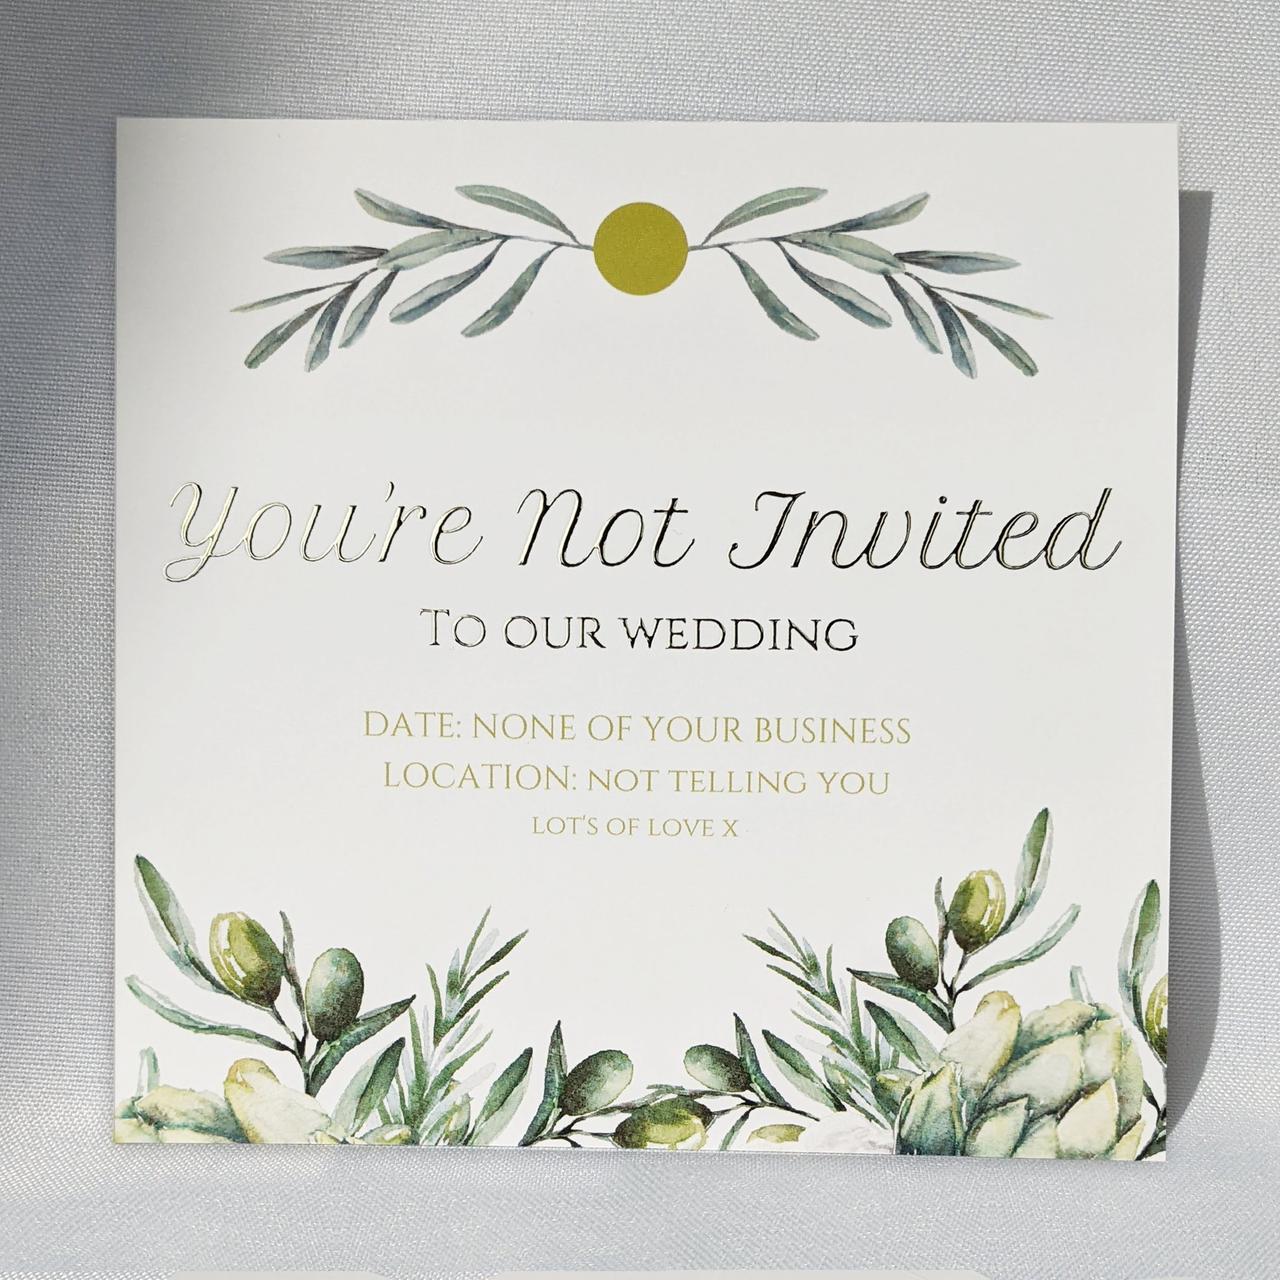 13-polite-ways-to-tell-someone-they-re-not-invited-to-your-wedding